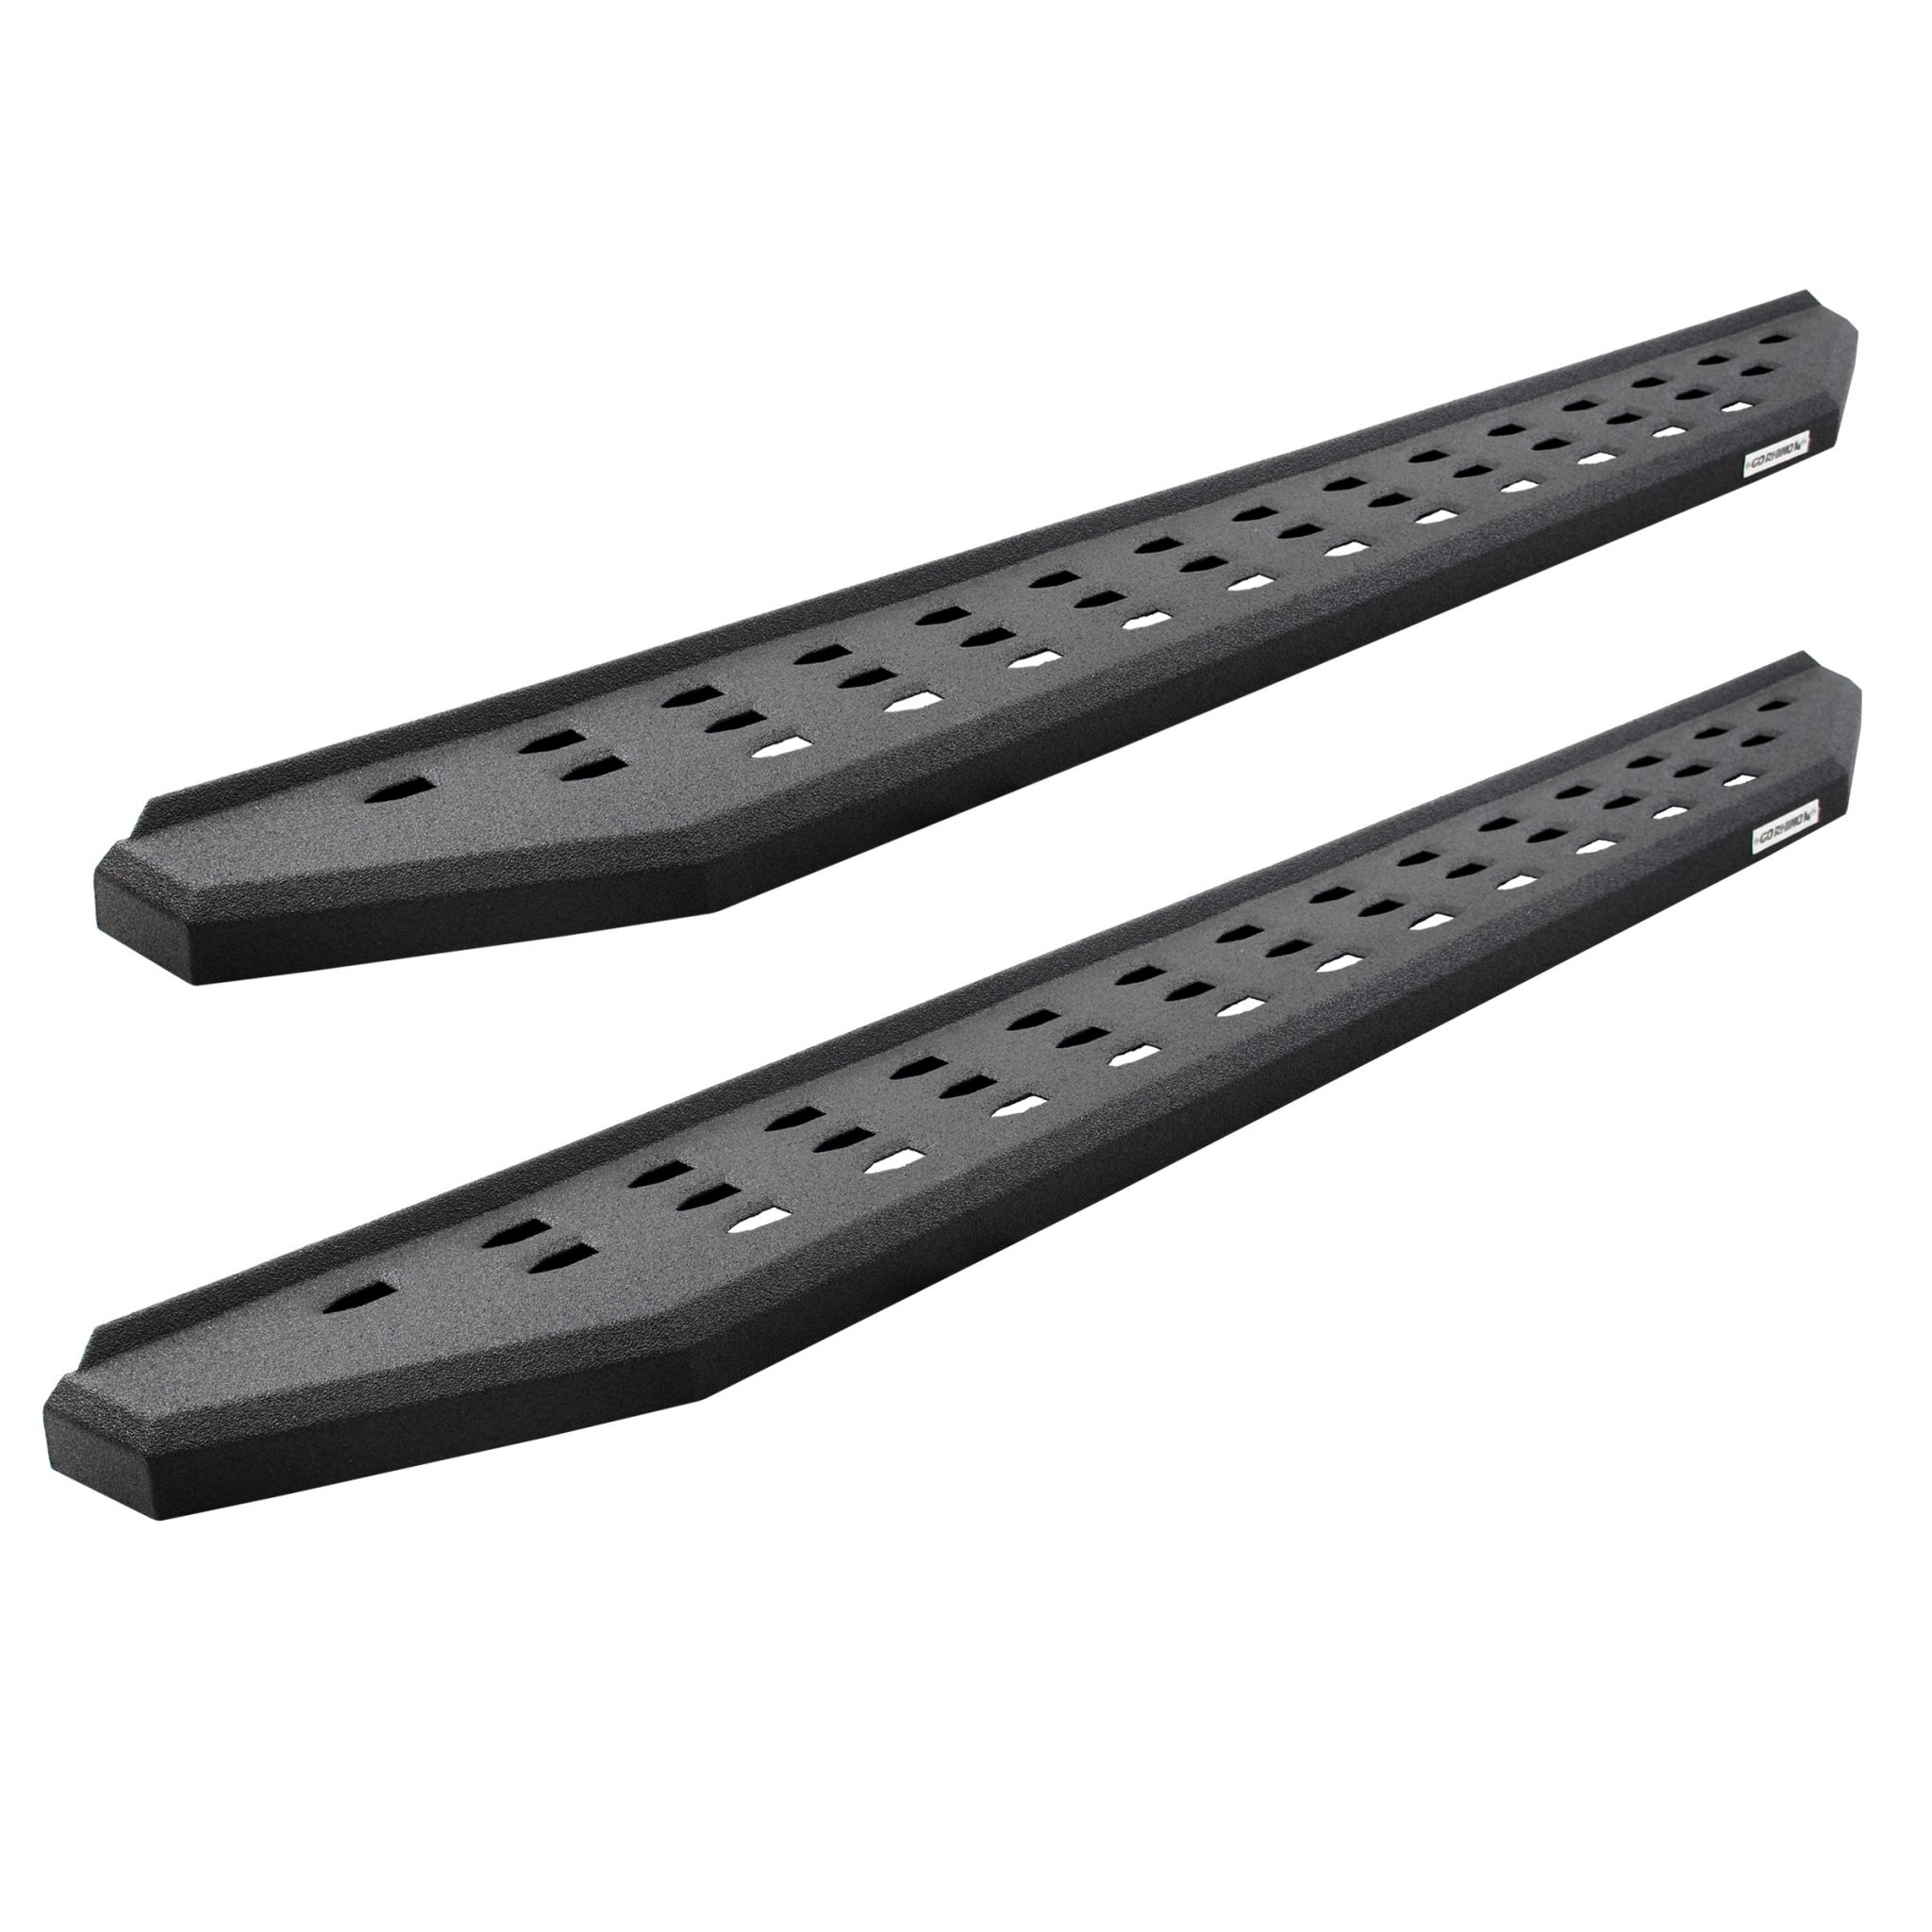 Go Rhino - 6903688020T - RB20 Running Boards With Mounting Brackets & 2 Pairs of Drop Steps Kit - Protective Bedliner Coating